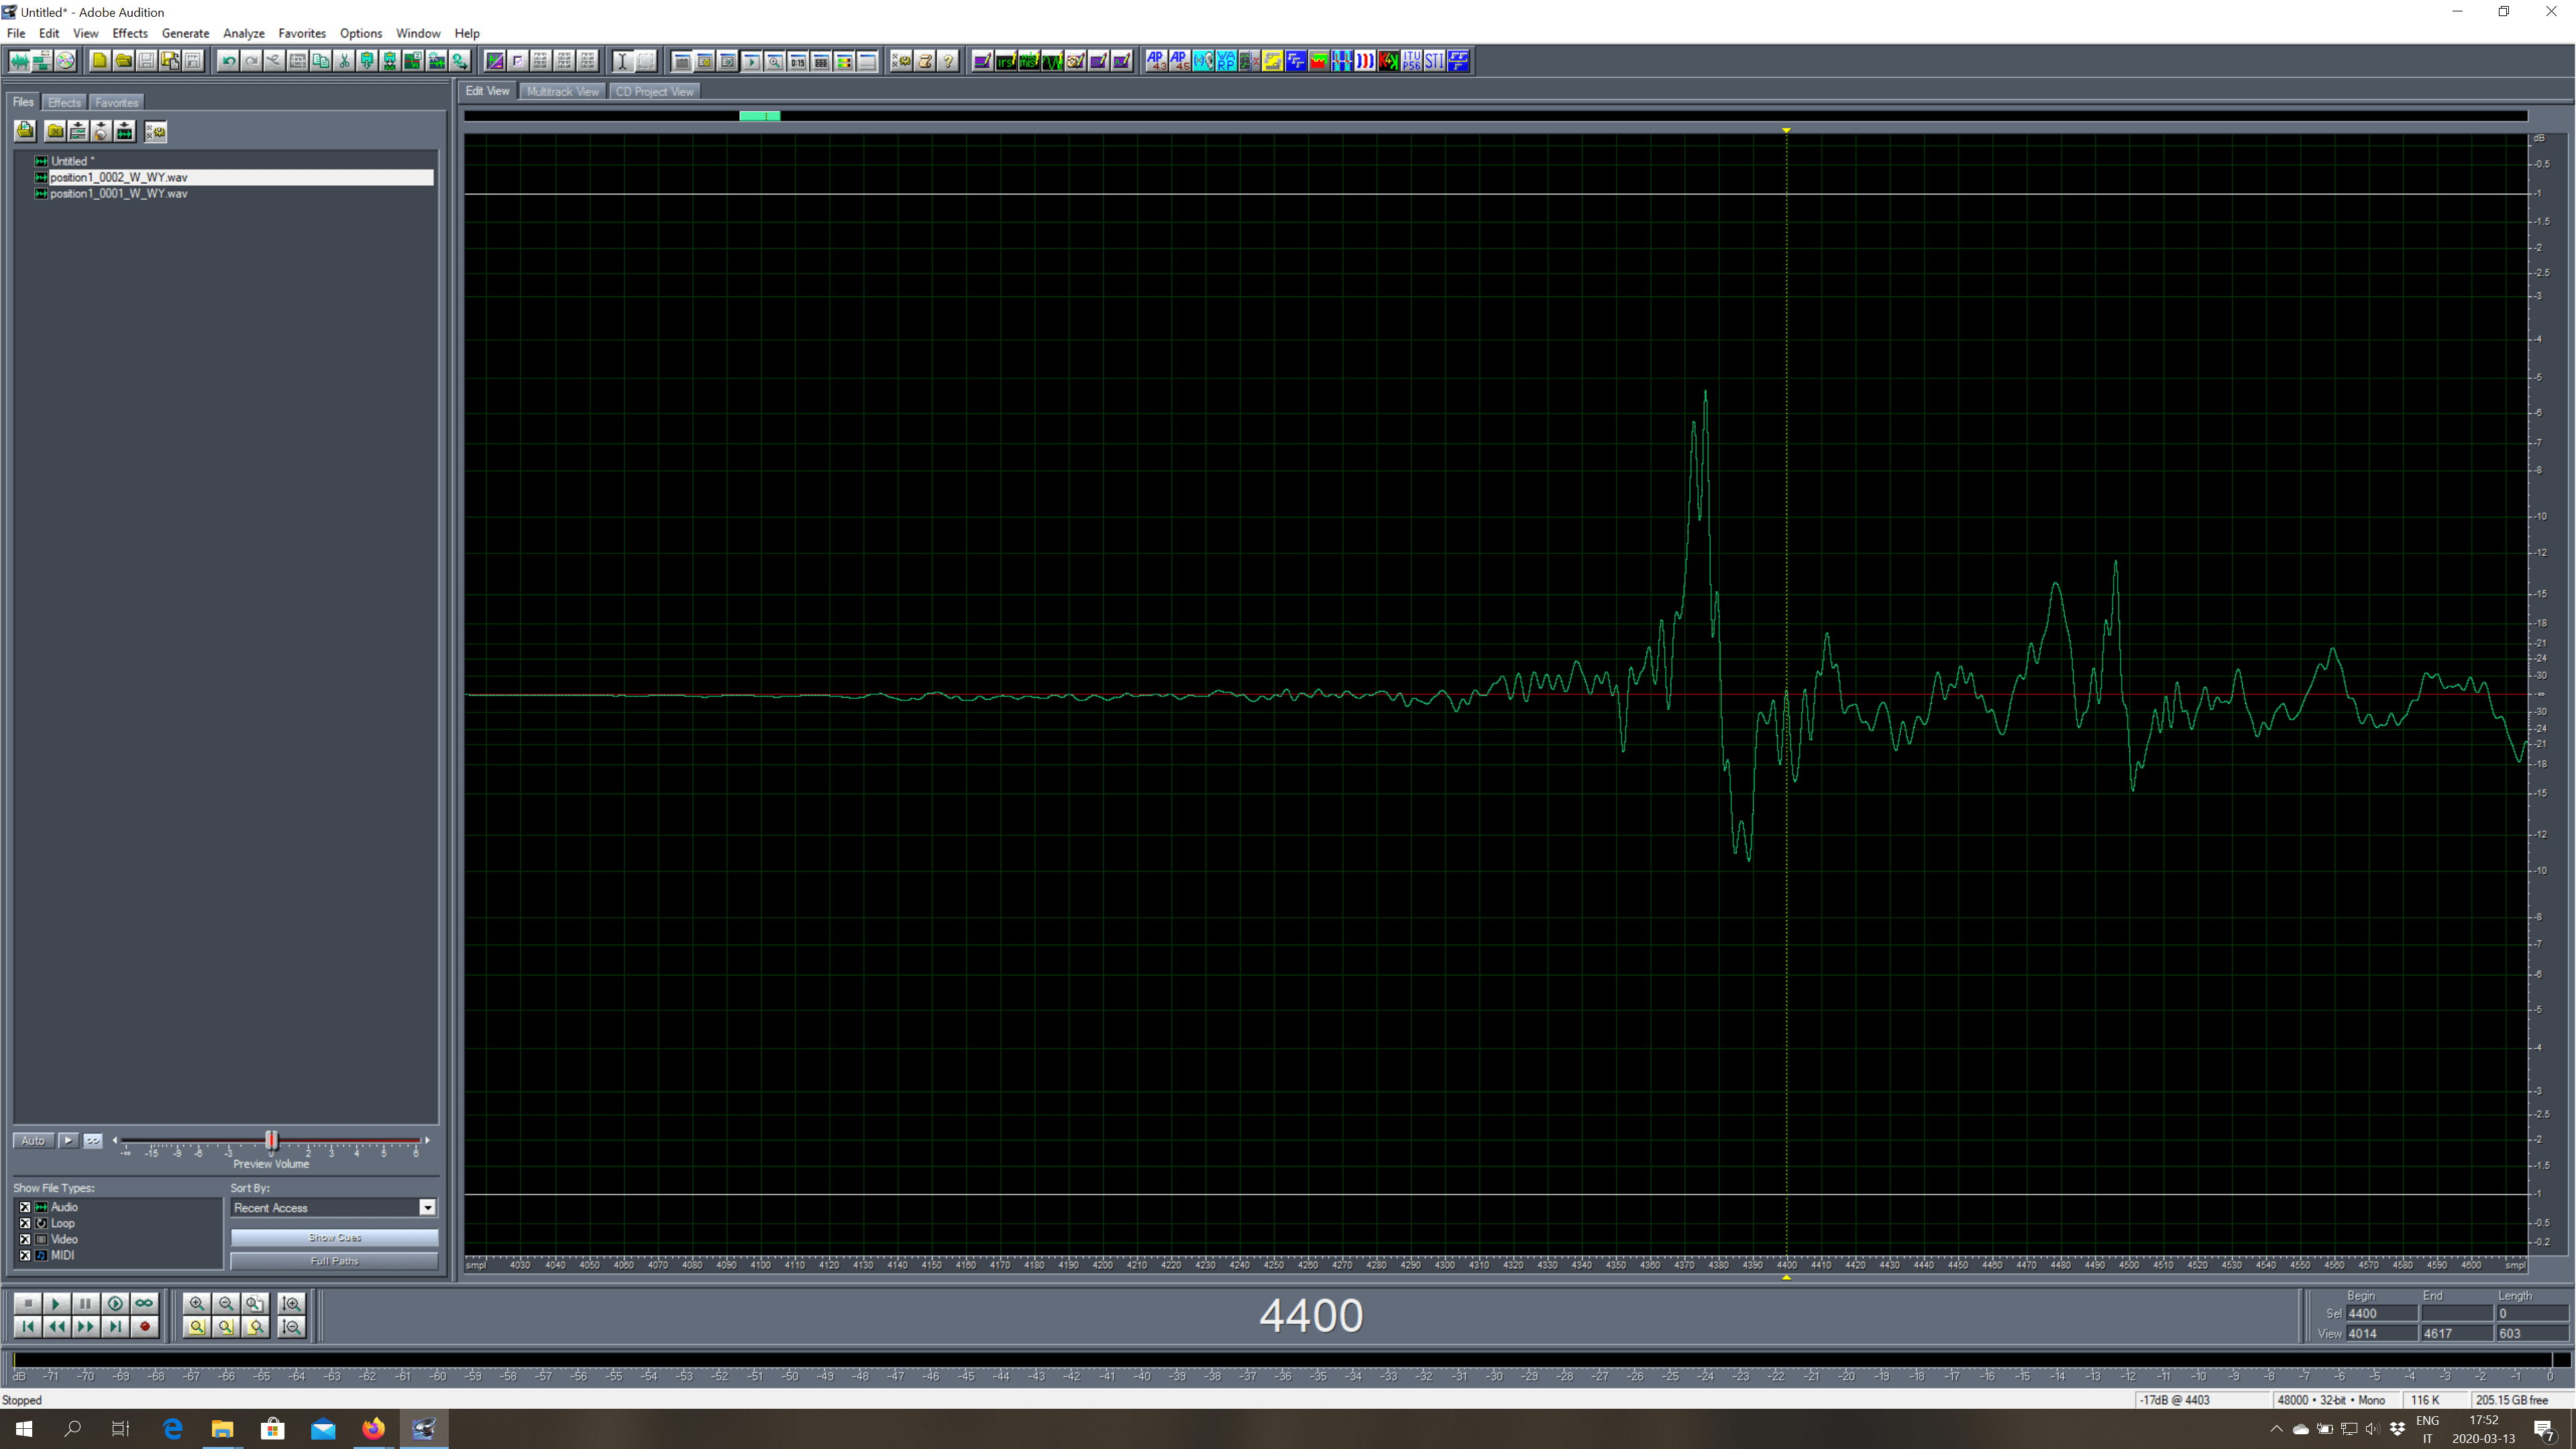 A zoomed-in impulse response, showing the zero-crossing between the direct sound and the first reflection